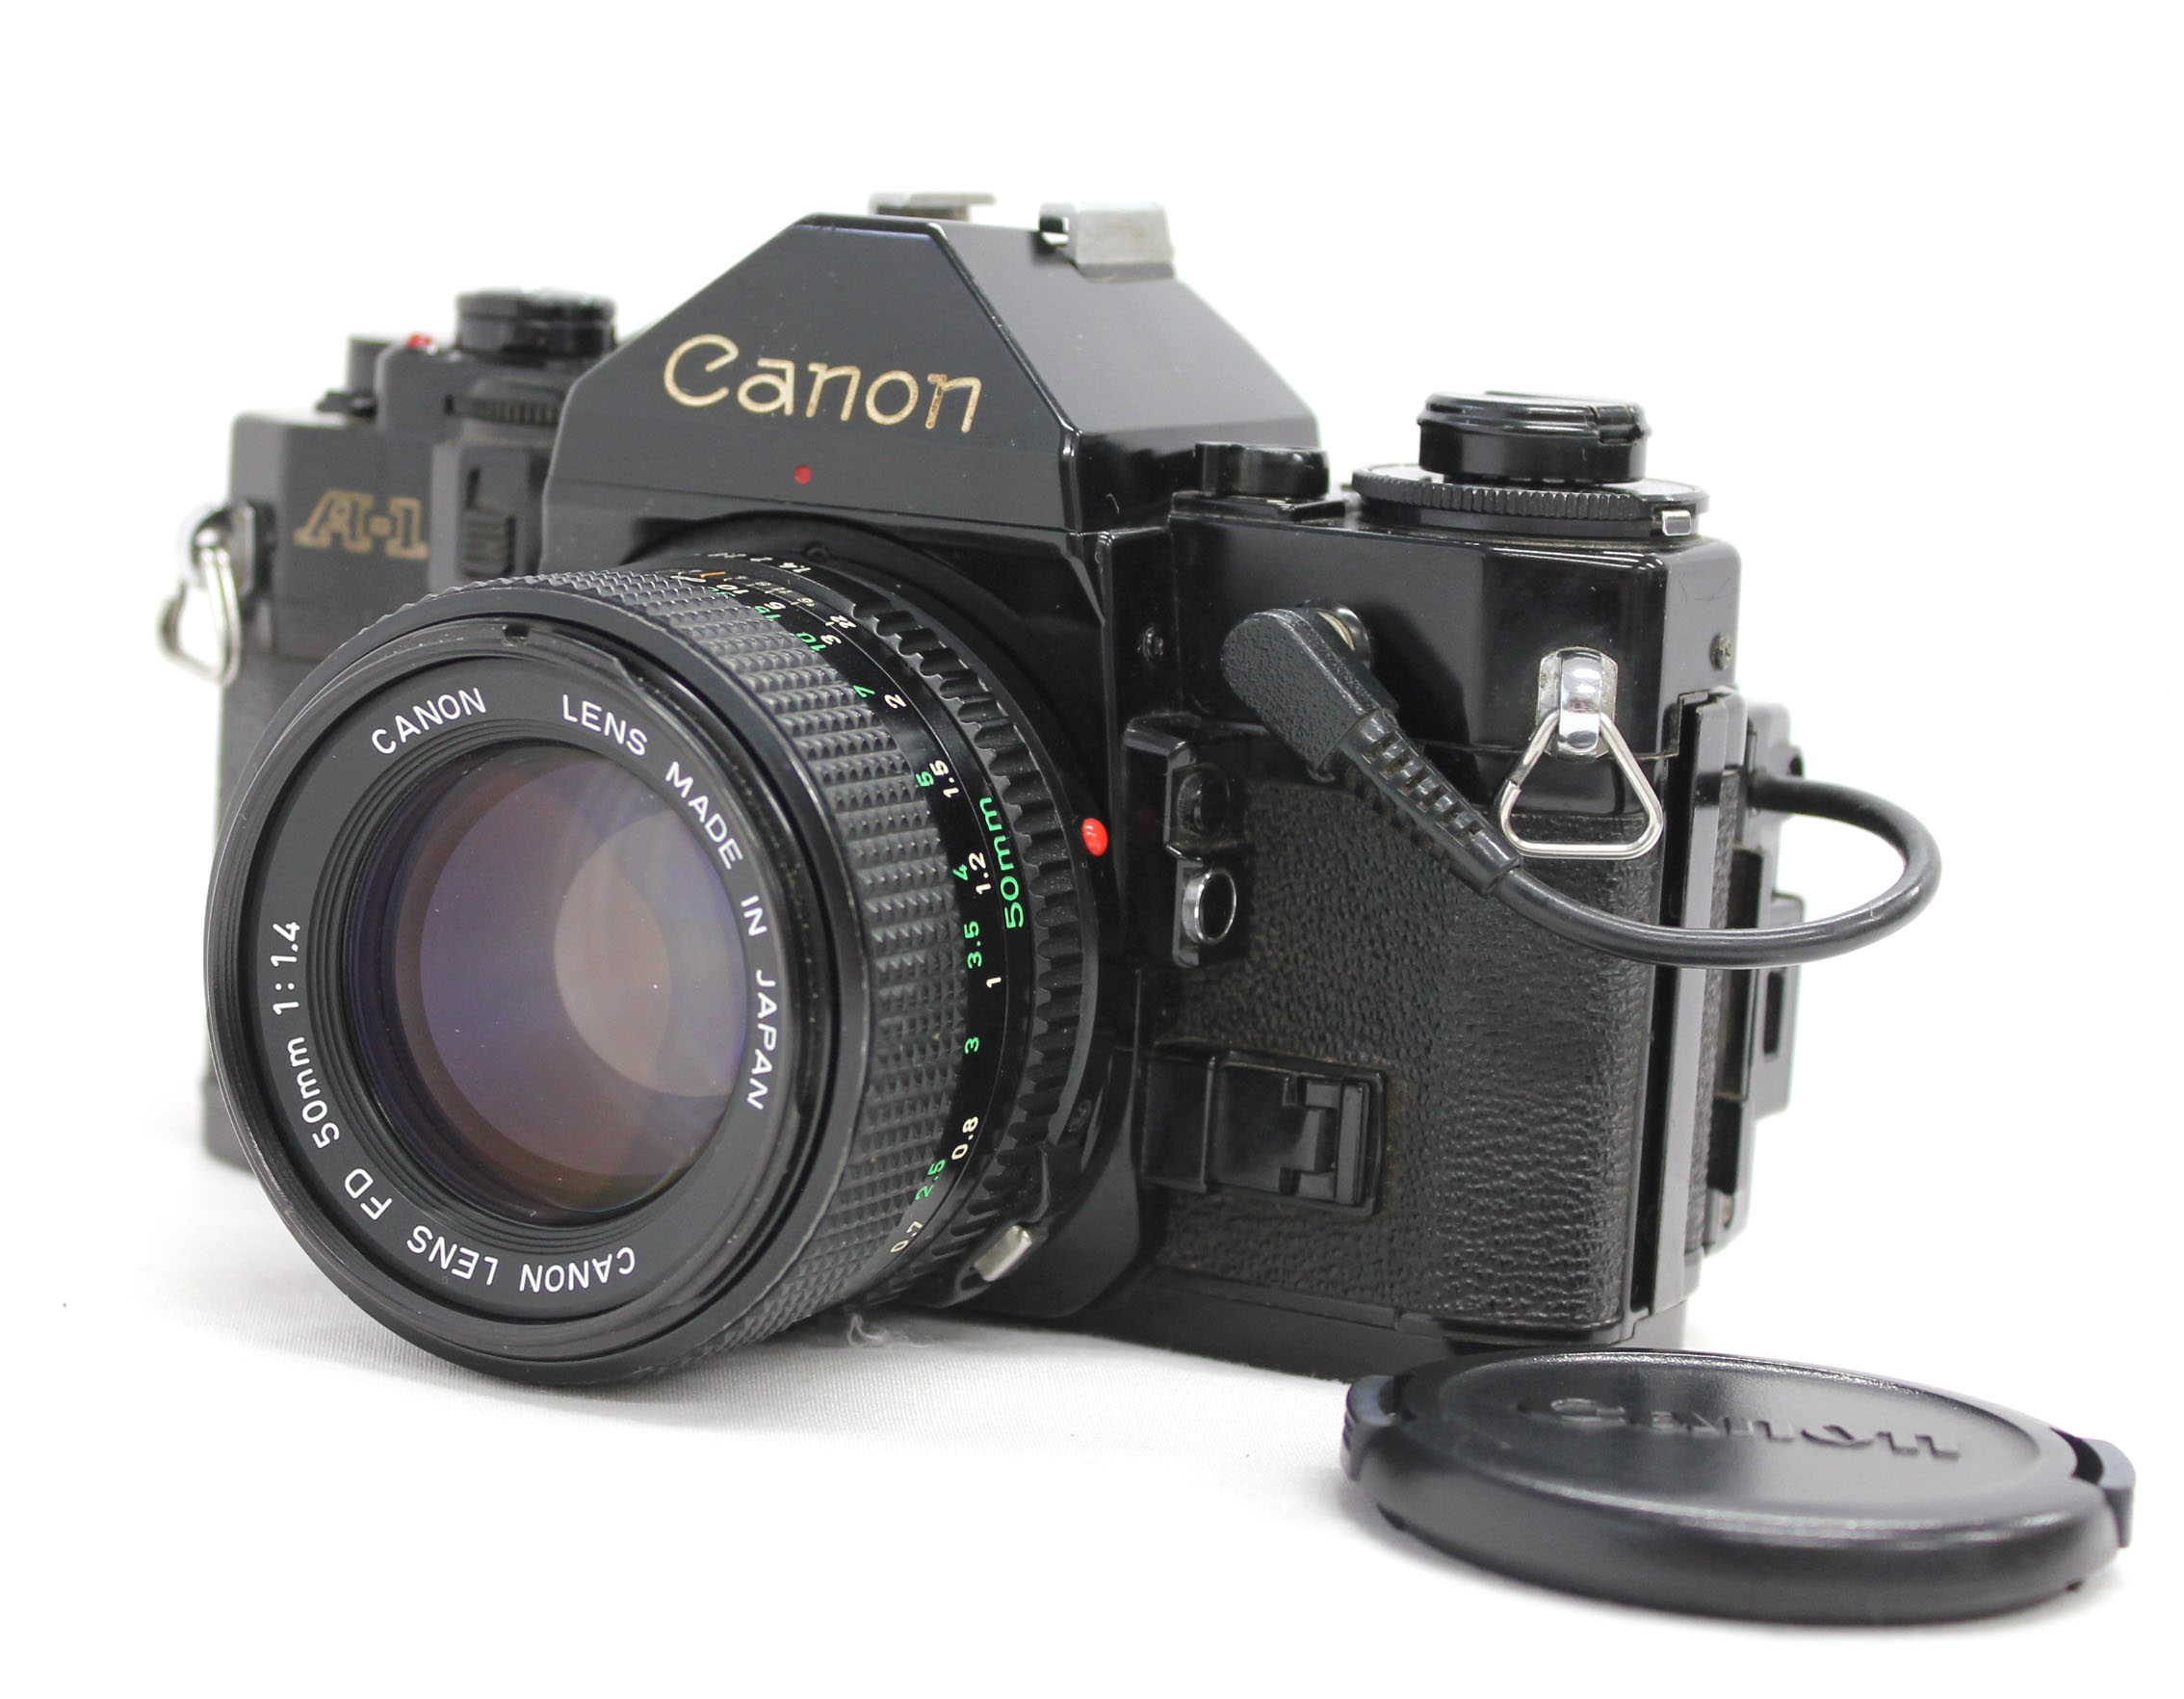 Japan Used Camera Shop | Canon A-1 35mm SLR Film Camera with Data Back A & New FD 50mm F/1.4 Lens from Japan